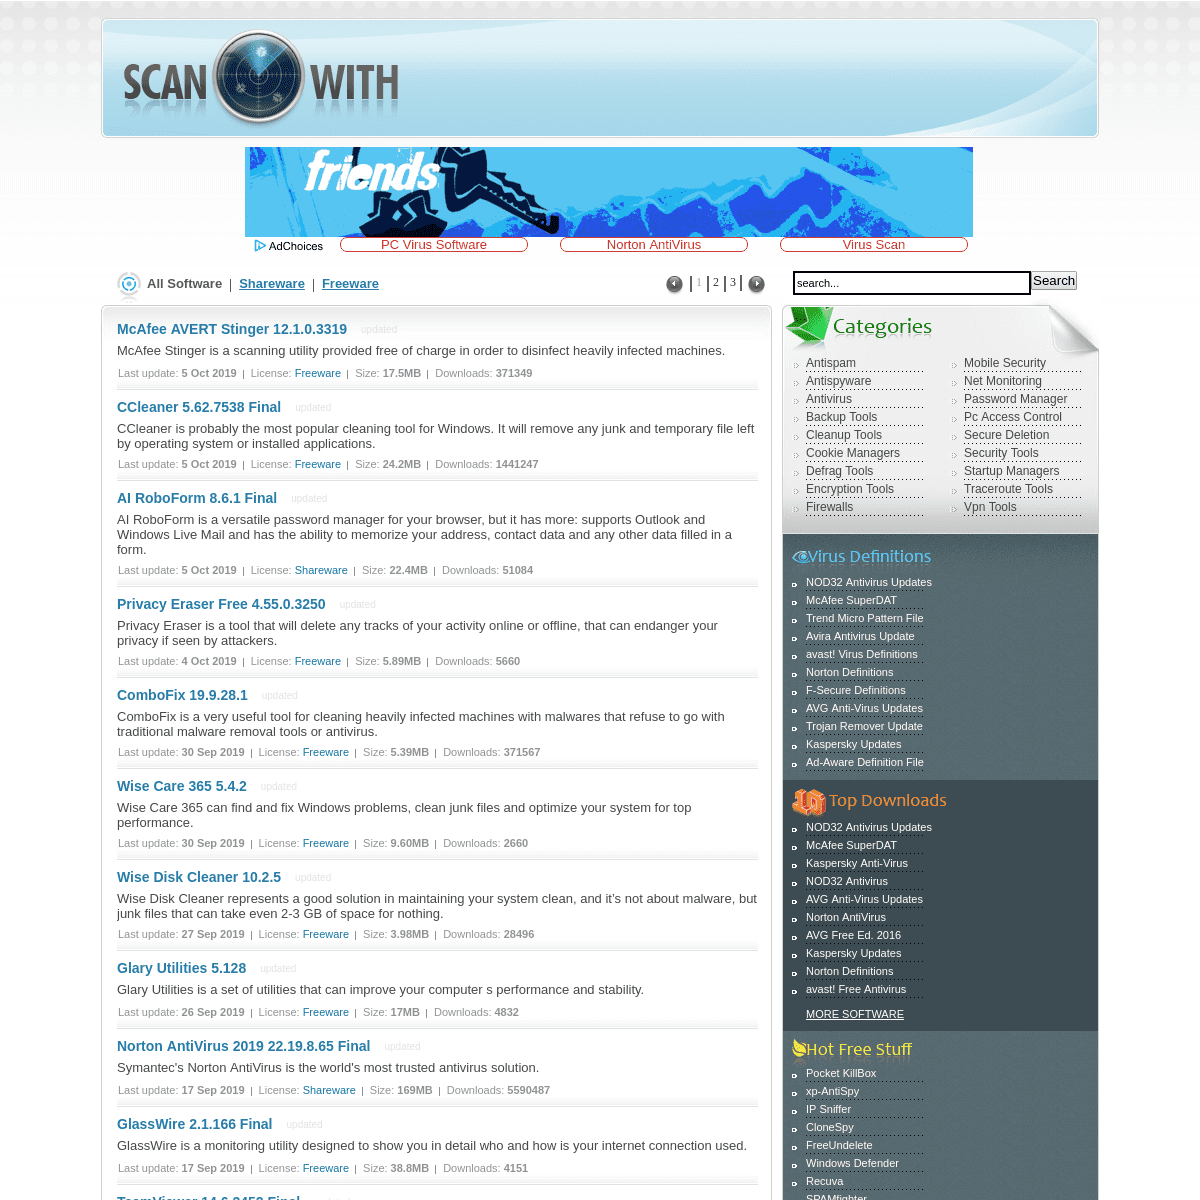 A complete backup of scanwith.com